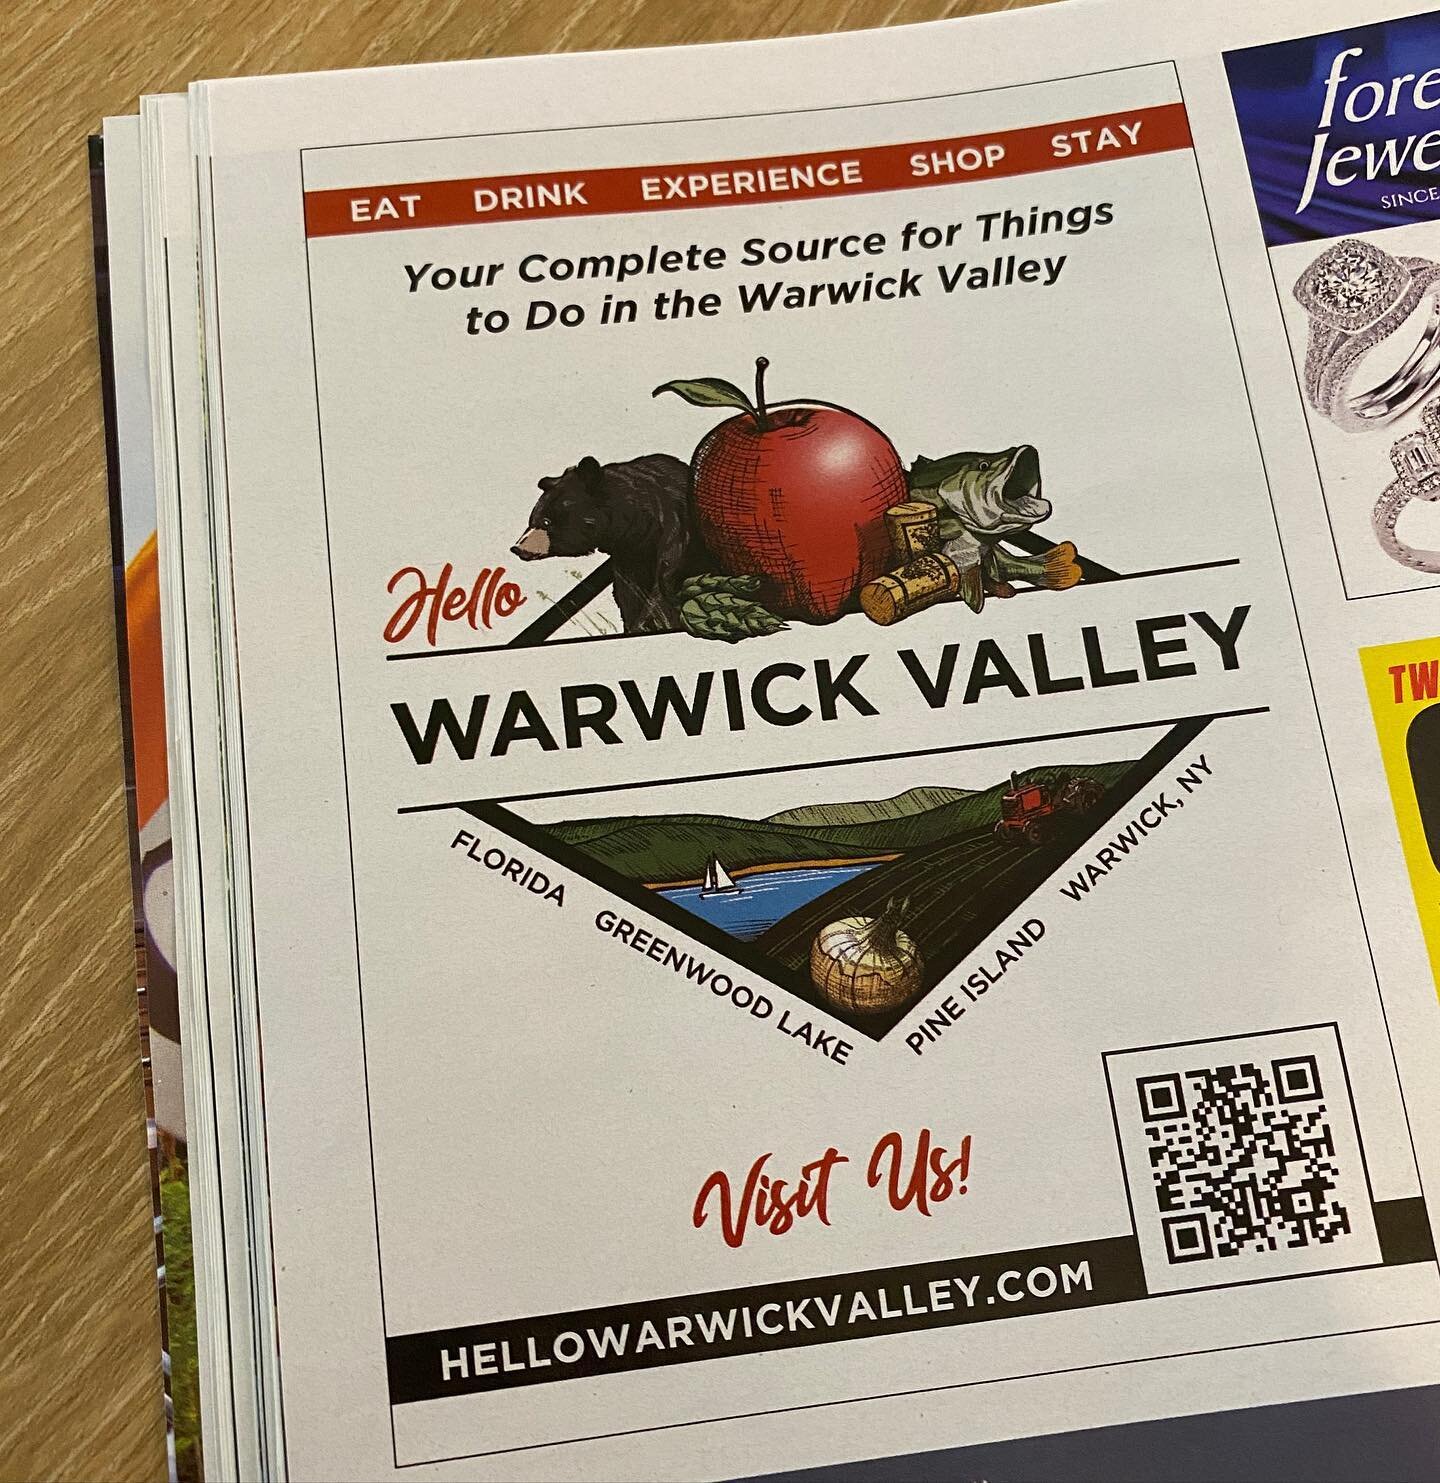 So fun to see the identity I created for @hellowarwickvalley printed in the July issue of @chronogram. Lots of great Warwick content in this issue. 
.
.#chronogram 
.
.
. 
. 
#sketch #ink #ocnyarts #hudsonvalleyart #nyartist #warwickartist #arttobuy 